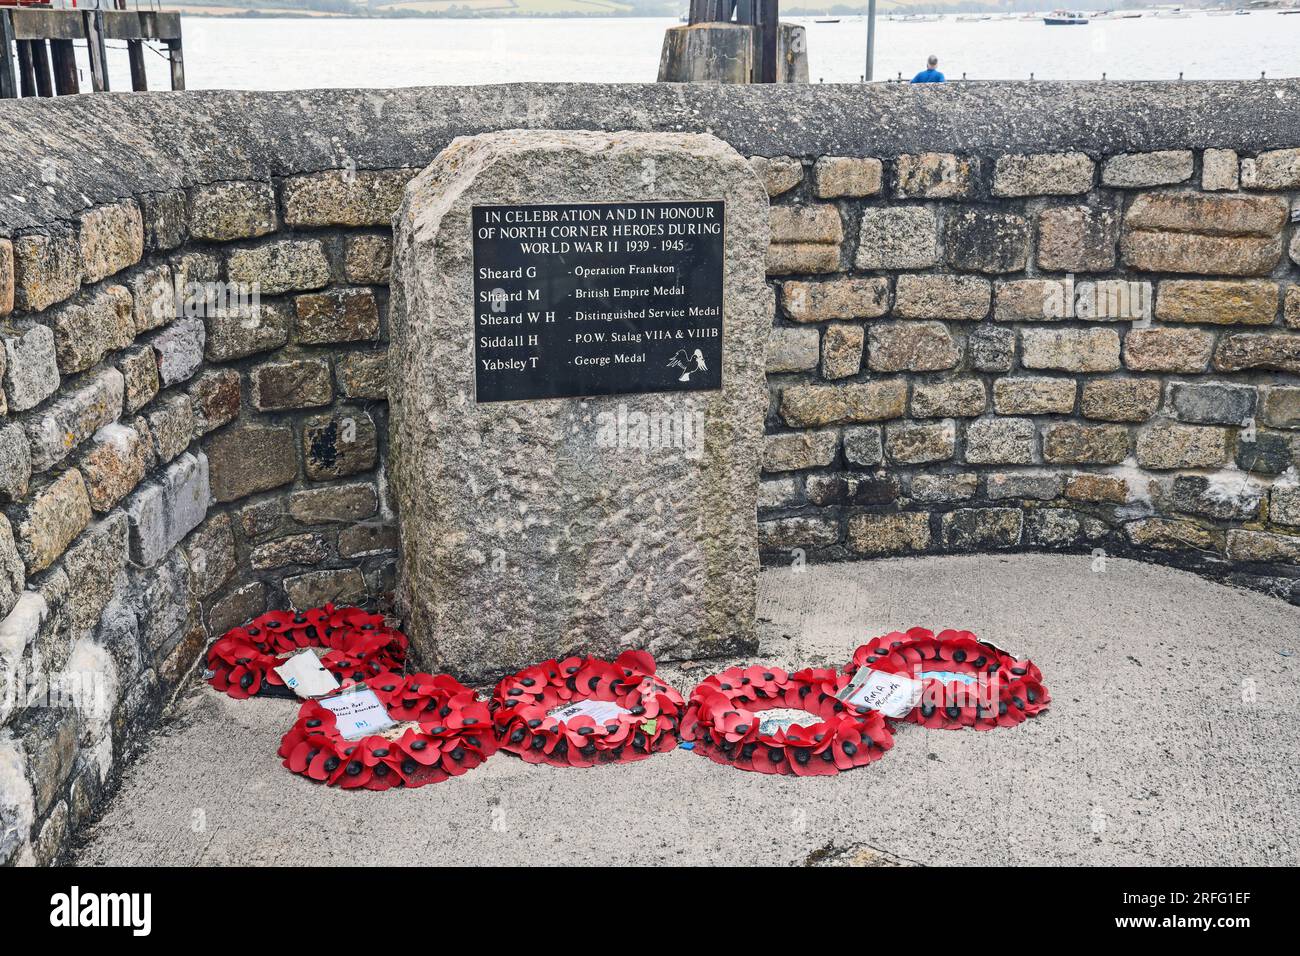 A war memorial at North Corner on the banks of the River Tamar in Devonport. Referred to as North Corner Heroes. Stock Photo